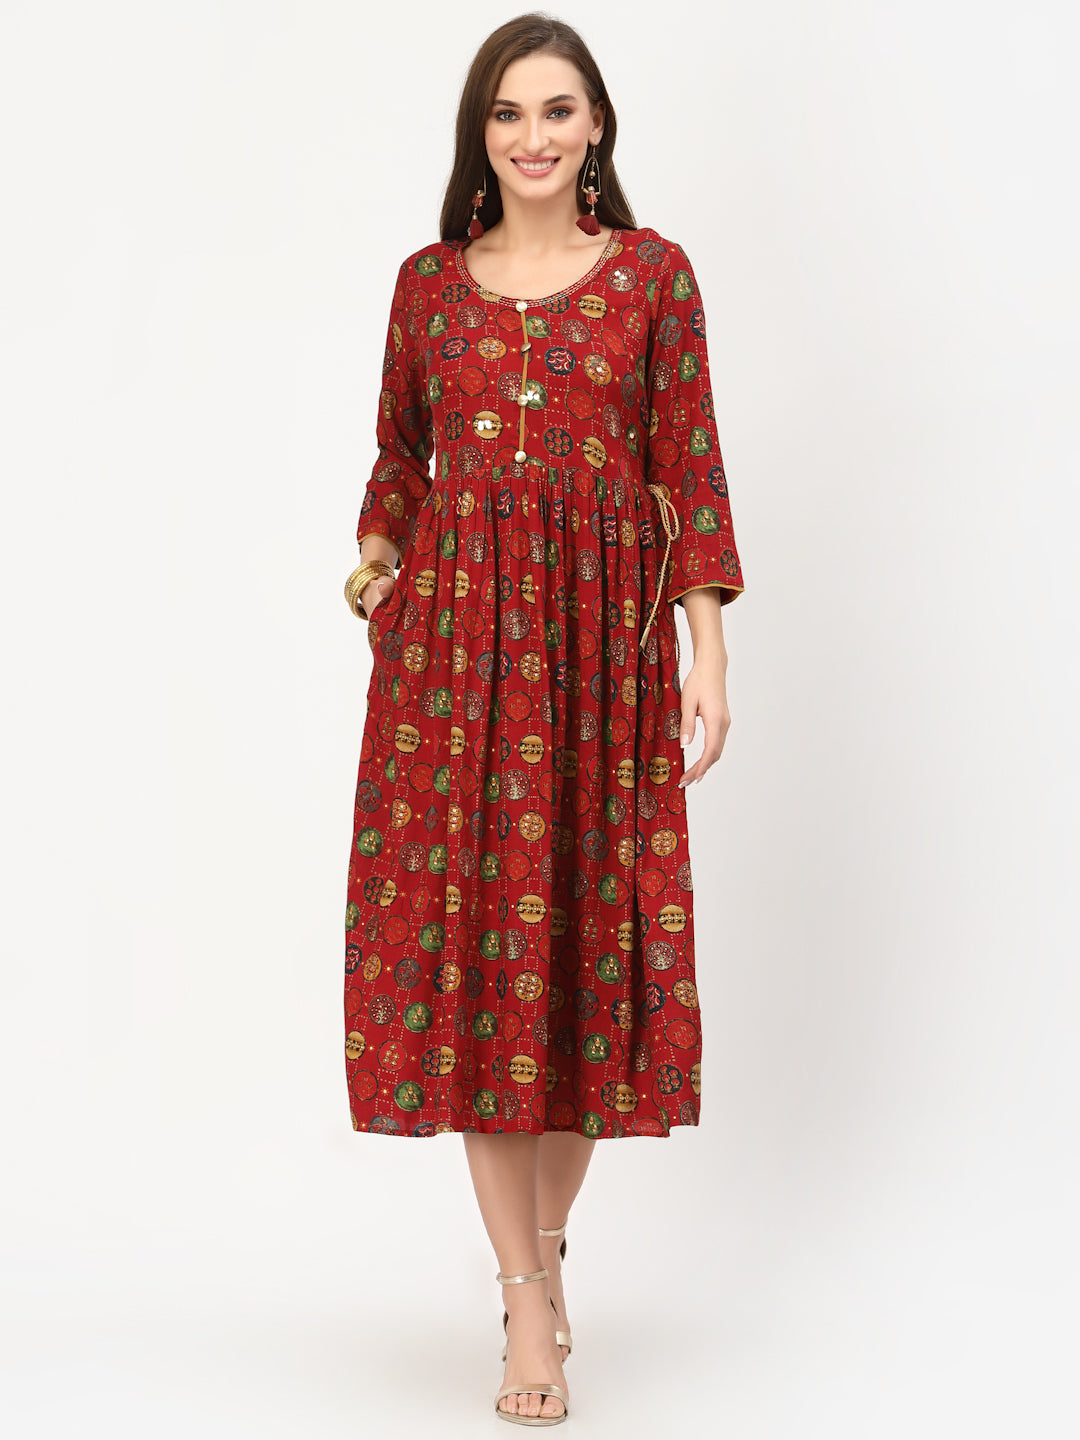 Red Fit & Flared Printed Dress - ARH333RD